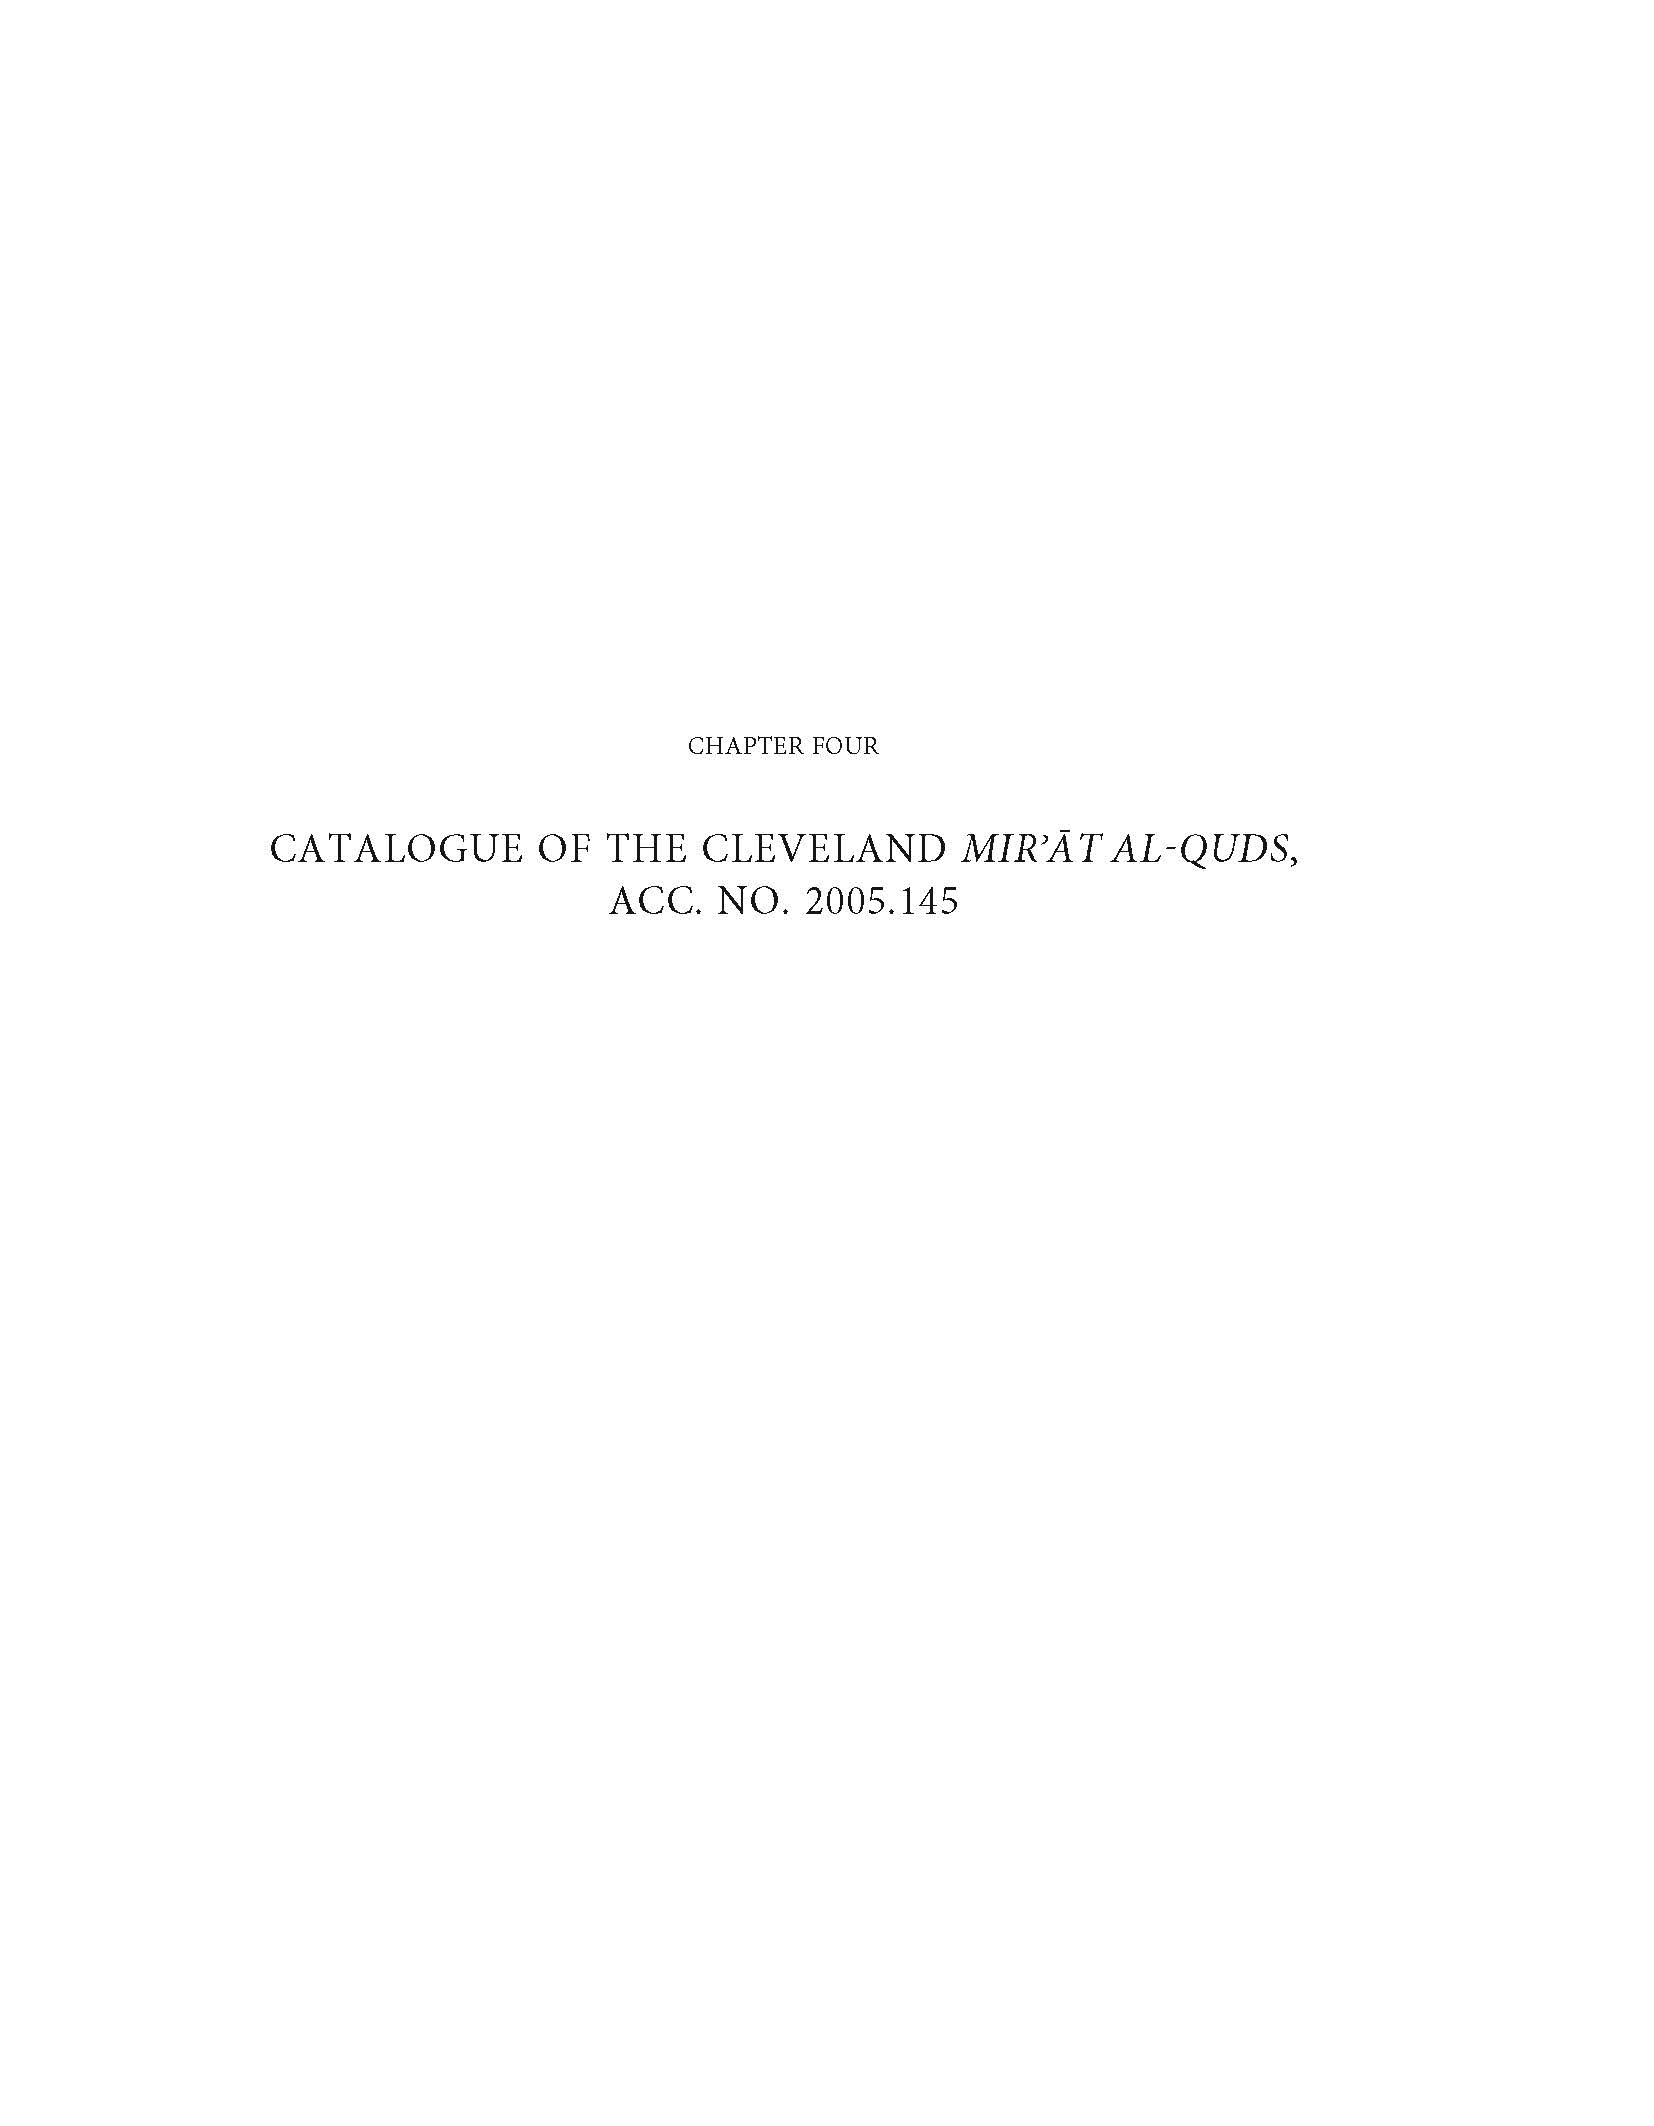 Pedro Moura Carvalho - Chapter Four of&nbsp;<span style="font-style: italic;">Mir’āt al-quds (Mirror of Holiness): A Life of Christ for Emperor Akbar.&nbsp;</span>This study examines the&nbsp;<span style="font-style: italic;">Mir'at al-Quds (Mirror of Holiness)</span>, an account of the life of Christ written by a Jesuit missionary to the court of Mughal Emperor Akbar, who took an interest in Christianity. Three illustrated copies exist, the most important of which is in the Cleveland Museum of Art and forms the basis of this study. The text, originally in Persian, is translated to English for the first time by Wheeler M. Thackston. Chapter Four contains a detailed catalogue of the images in the copy of <span style="font-style: italic;">Mir'at al-Quds</span>&nbsp;housed in the Cleveland Museum of Art (Acc. No. 2004.145). This study is part of the series&nbsp;<span style="font-style: italic;">Studies and Sources on Islamic Art and Architecture: Supplements to Muqarnas</span>, Volume XII.